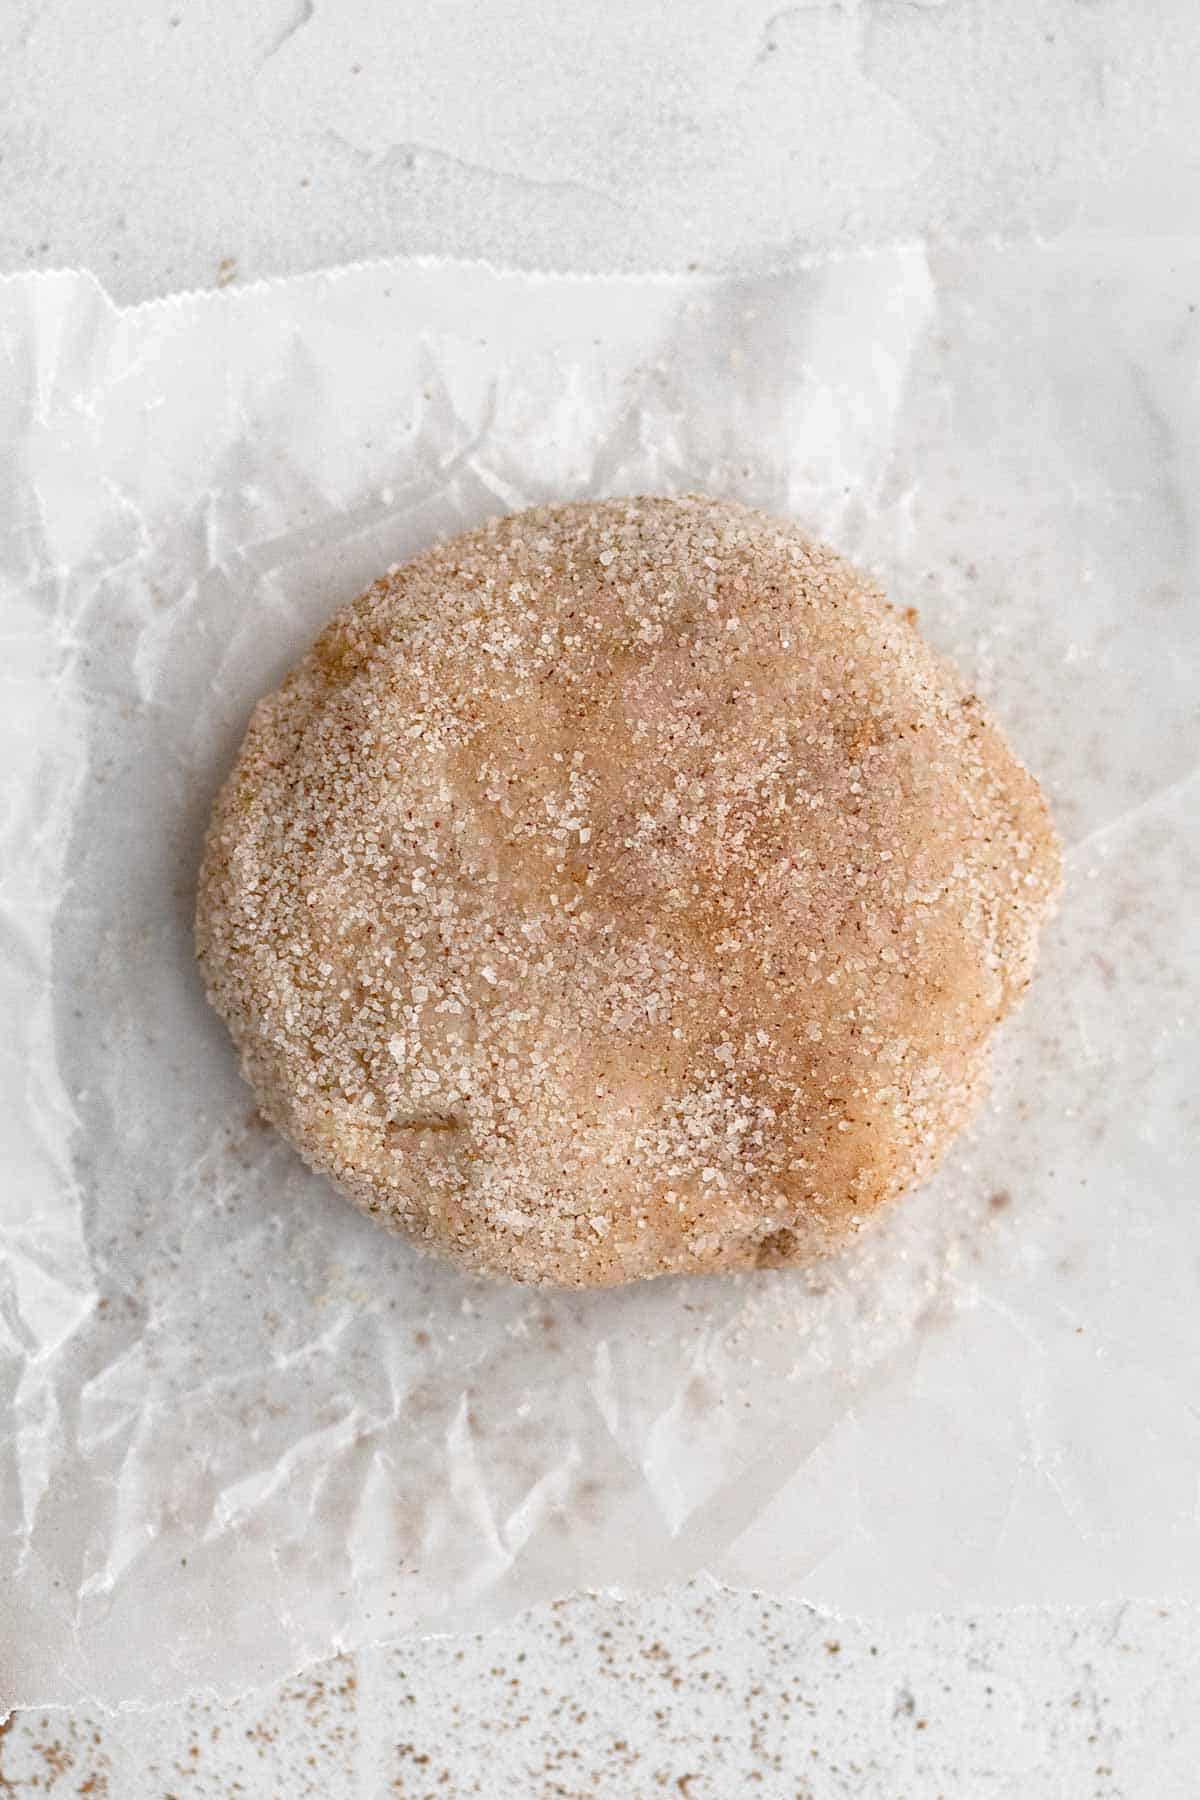 The gluten free snickerdoodle cookie dough discs covered in cinnamon sugar.